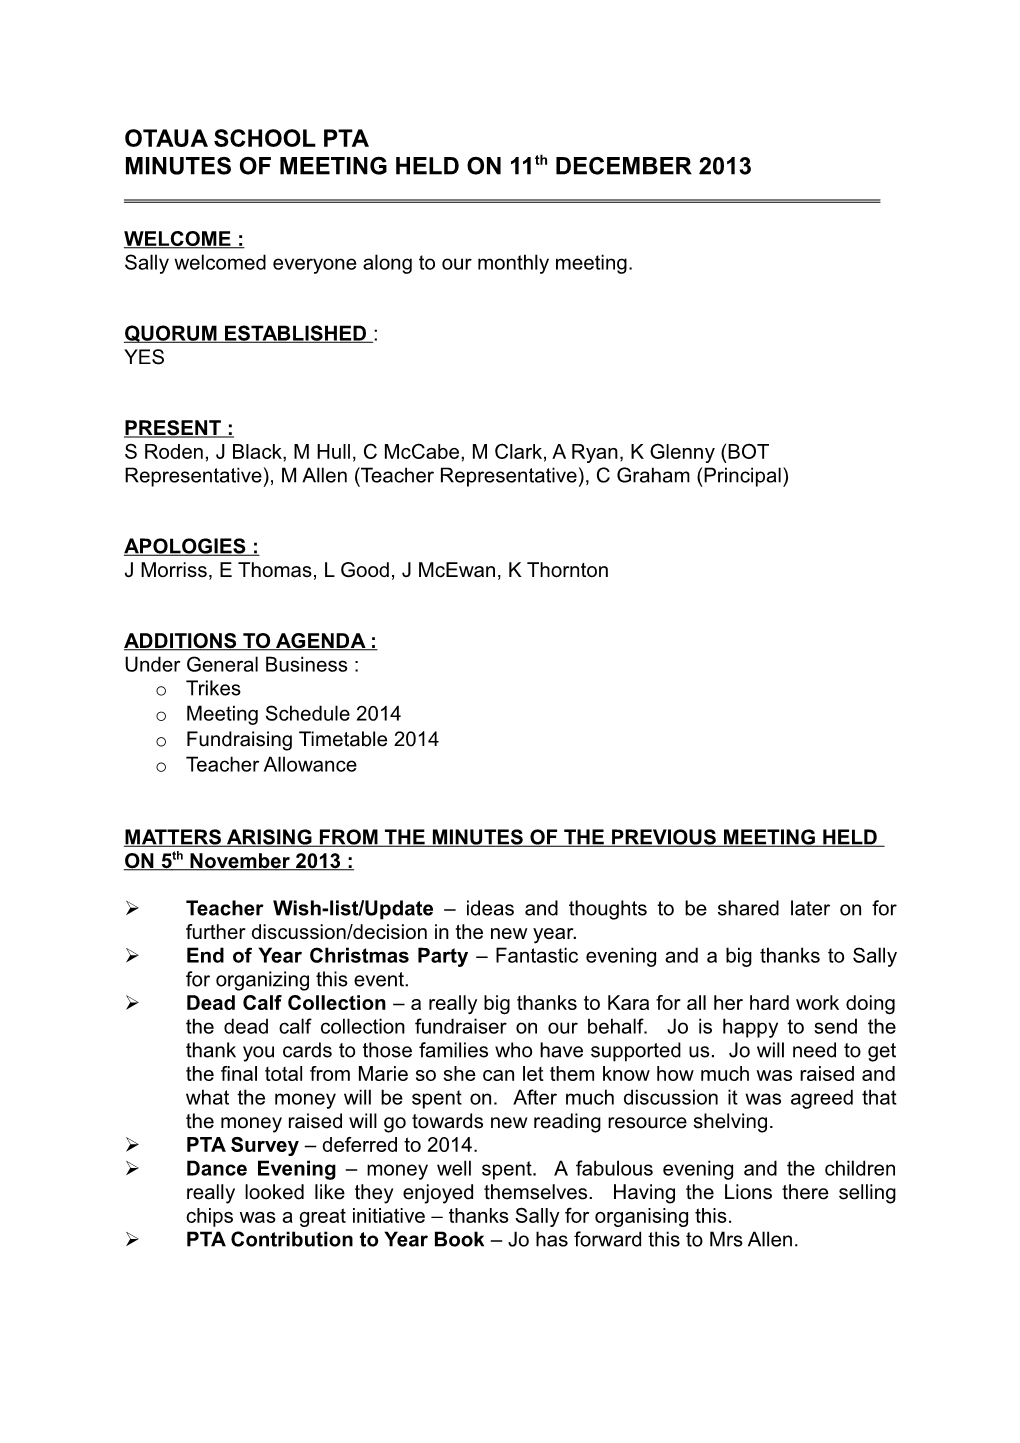 MINUTES of MEETING HELD on 11Th DECEMBER 2013